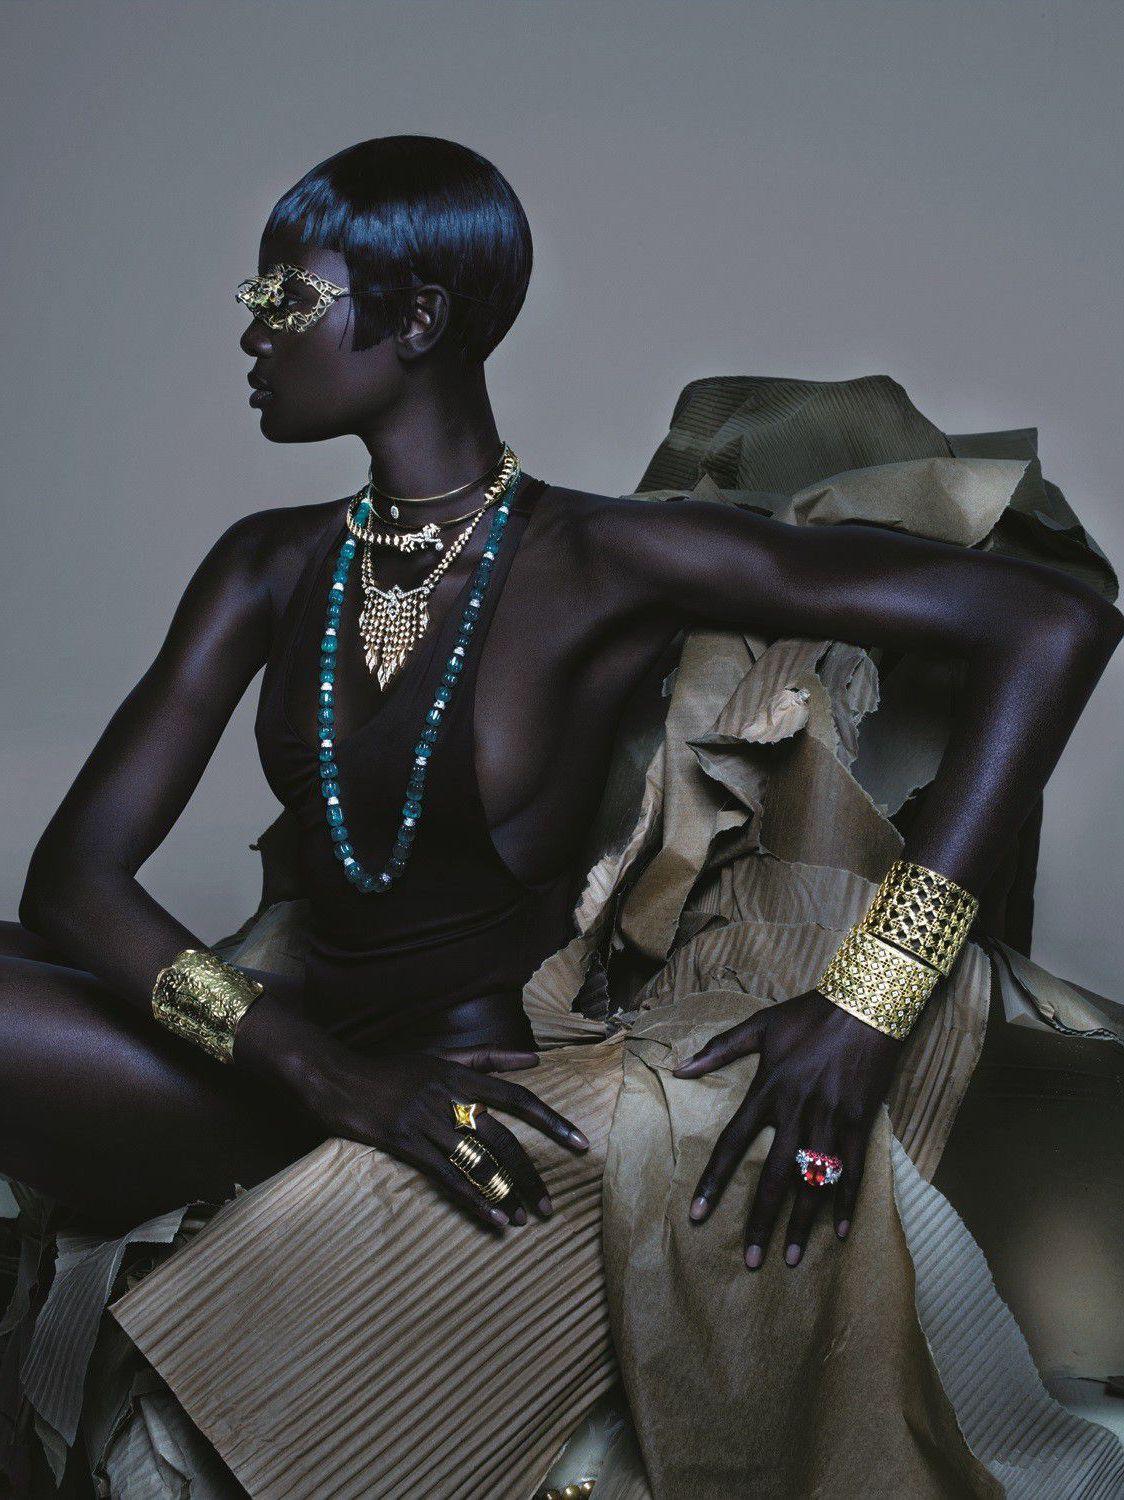 Duckie Thot by Byzantium for Vogue UK, Photo by Nick Knight, April 2019